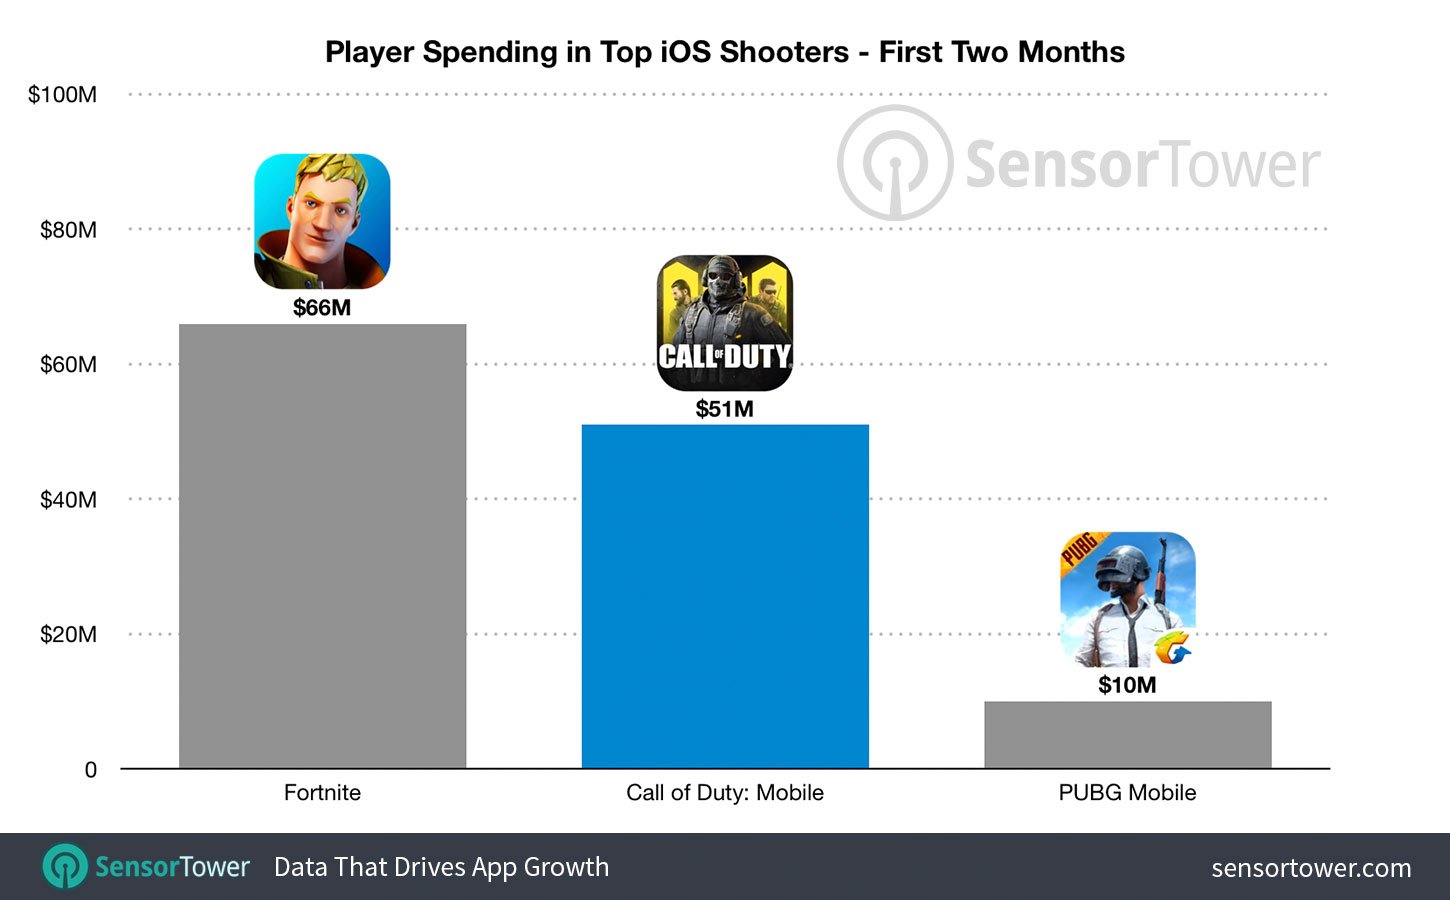 Call of Duty: Mobile iOS revenue first two months compared to Fortnite and PUBG Mobile